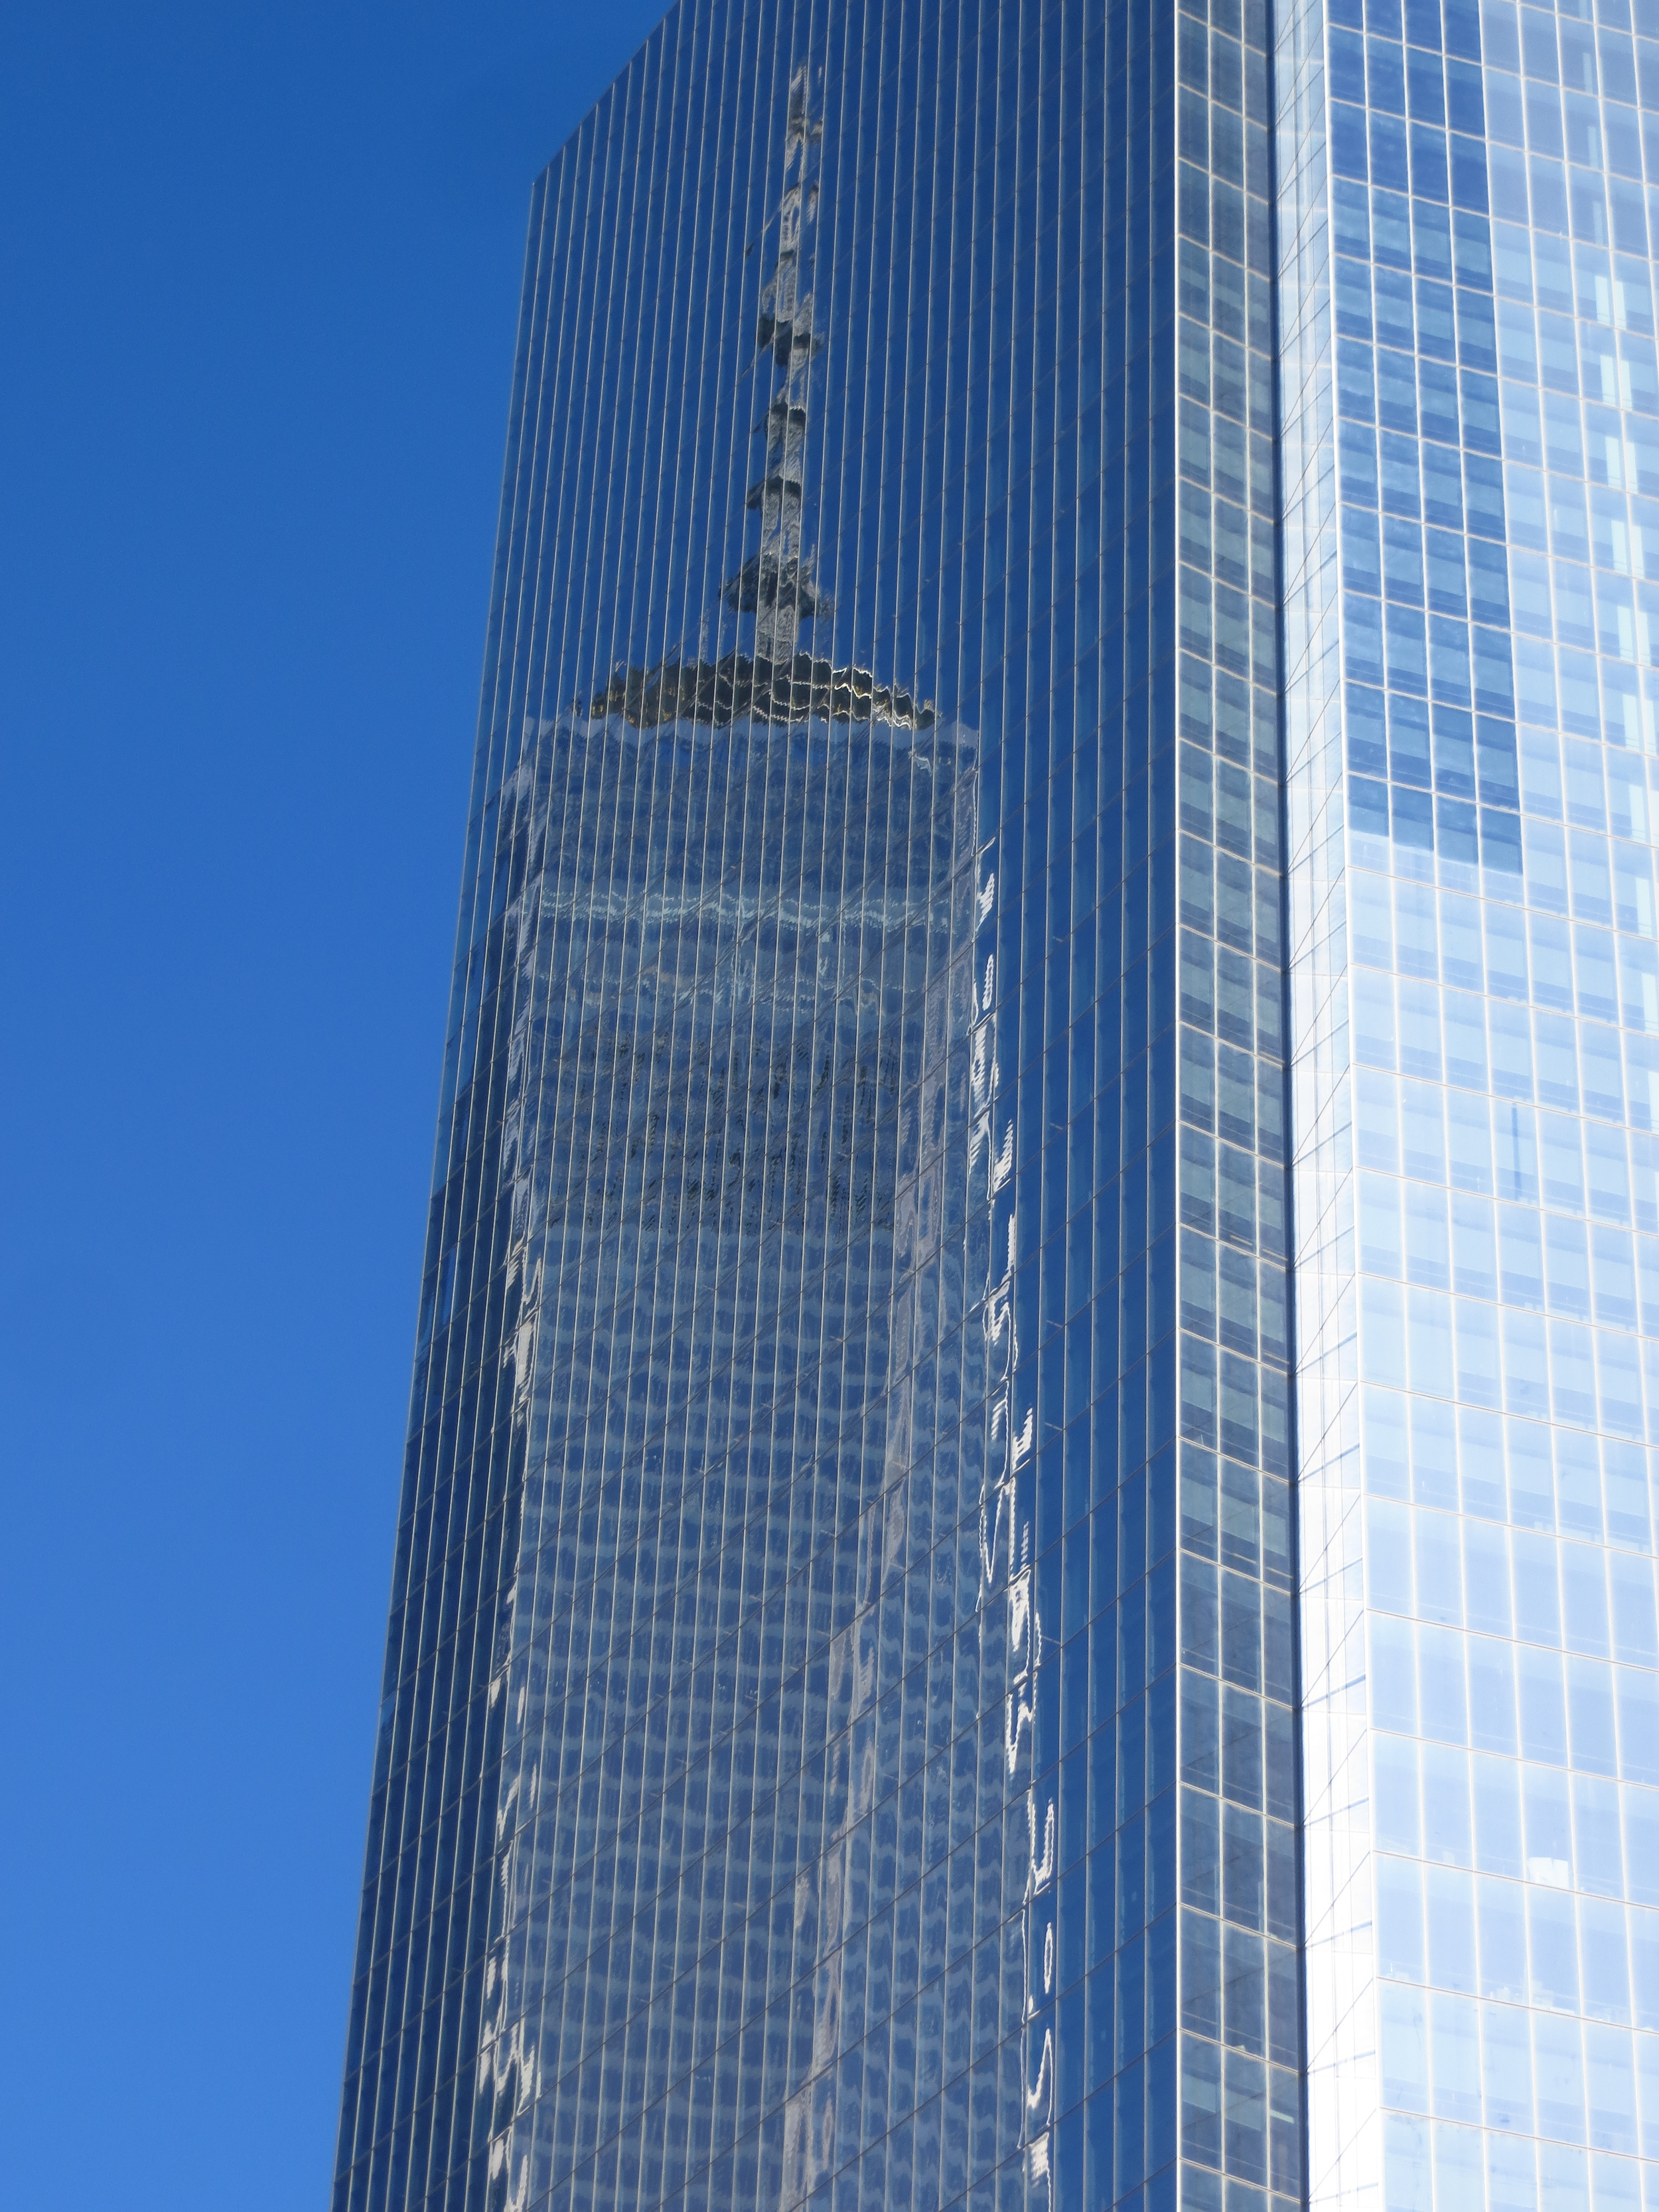 WTC reflected